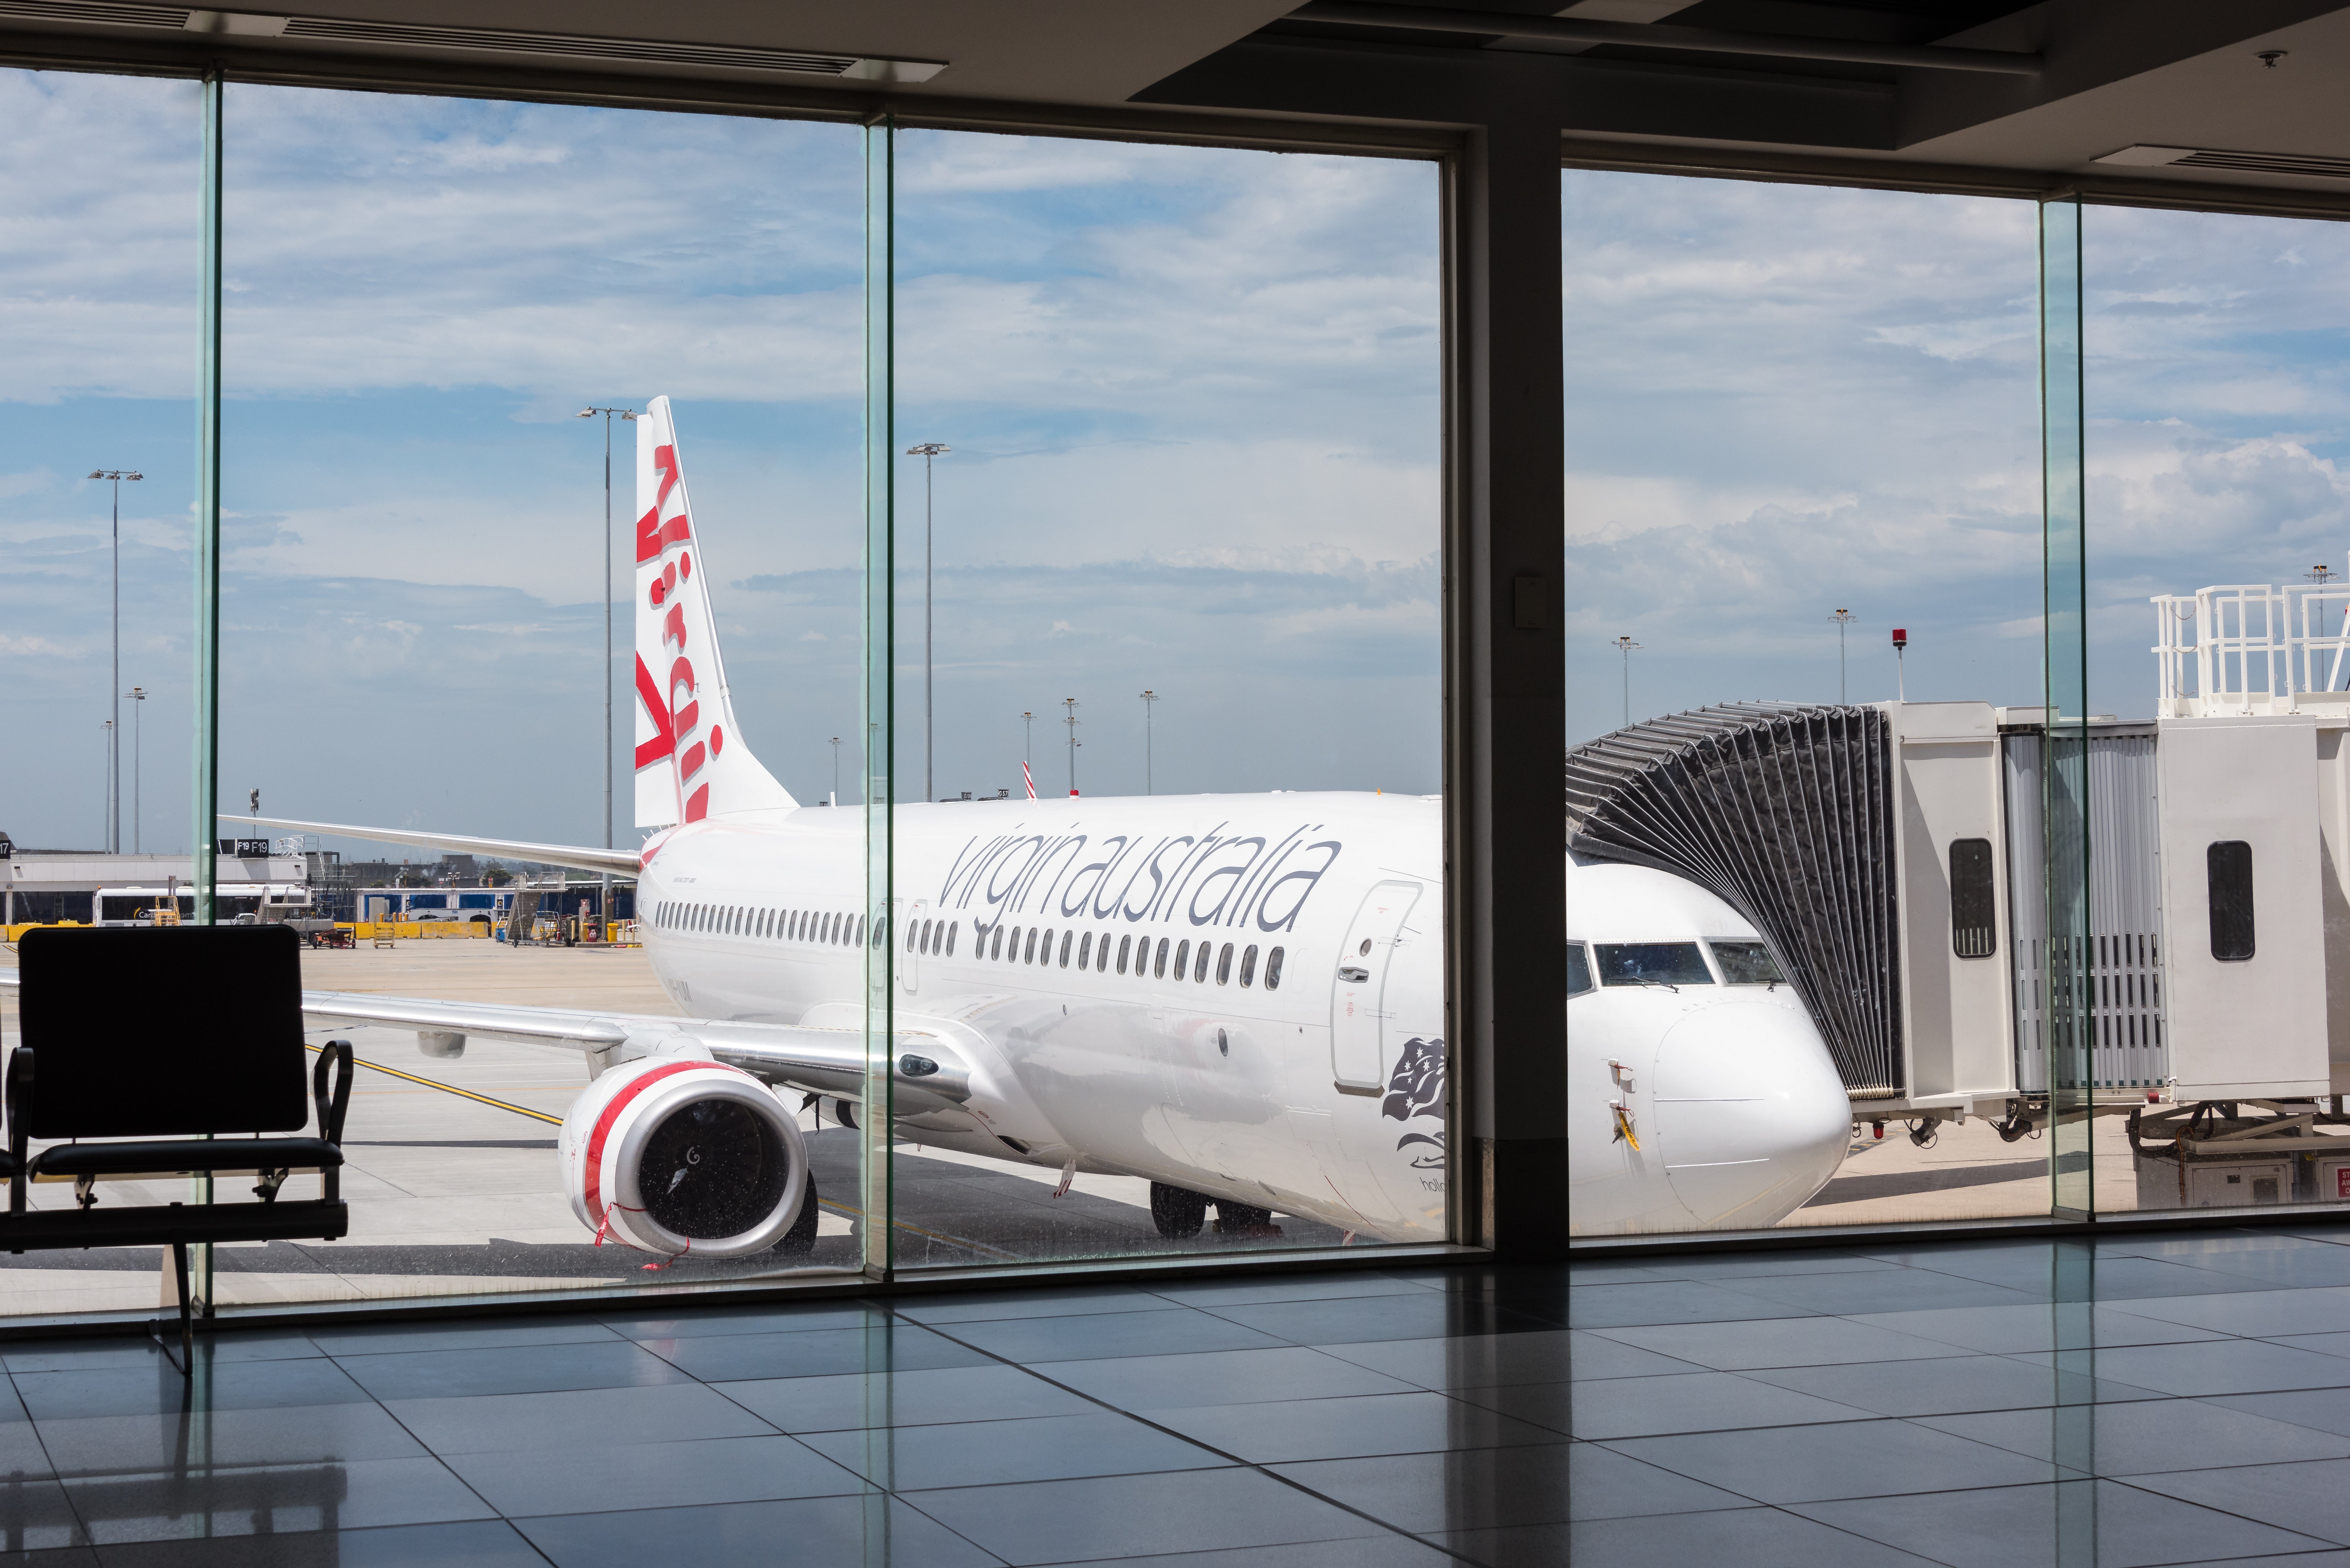 Virgin Australia crew member accused of “extremely inappropriate” anti-mask rant